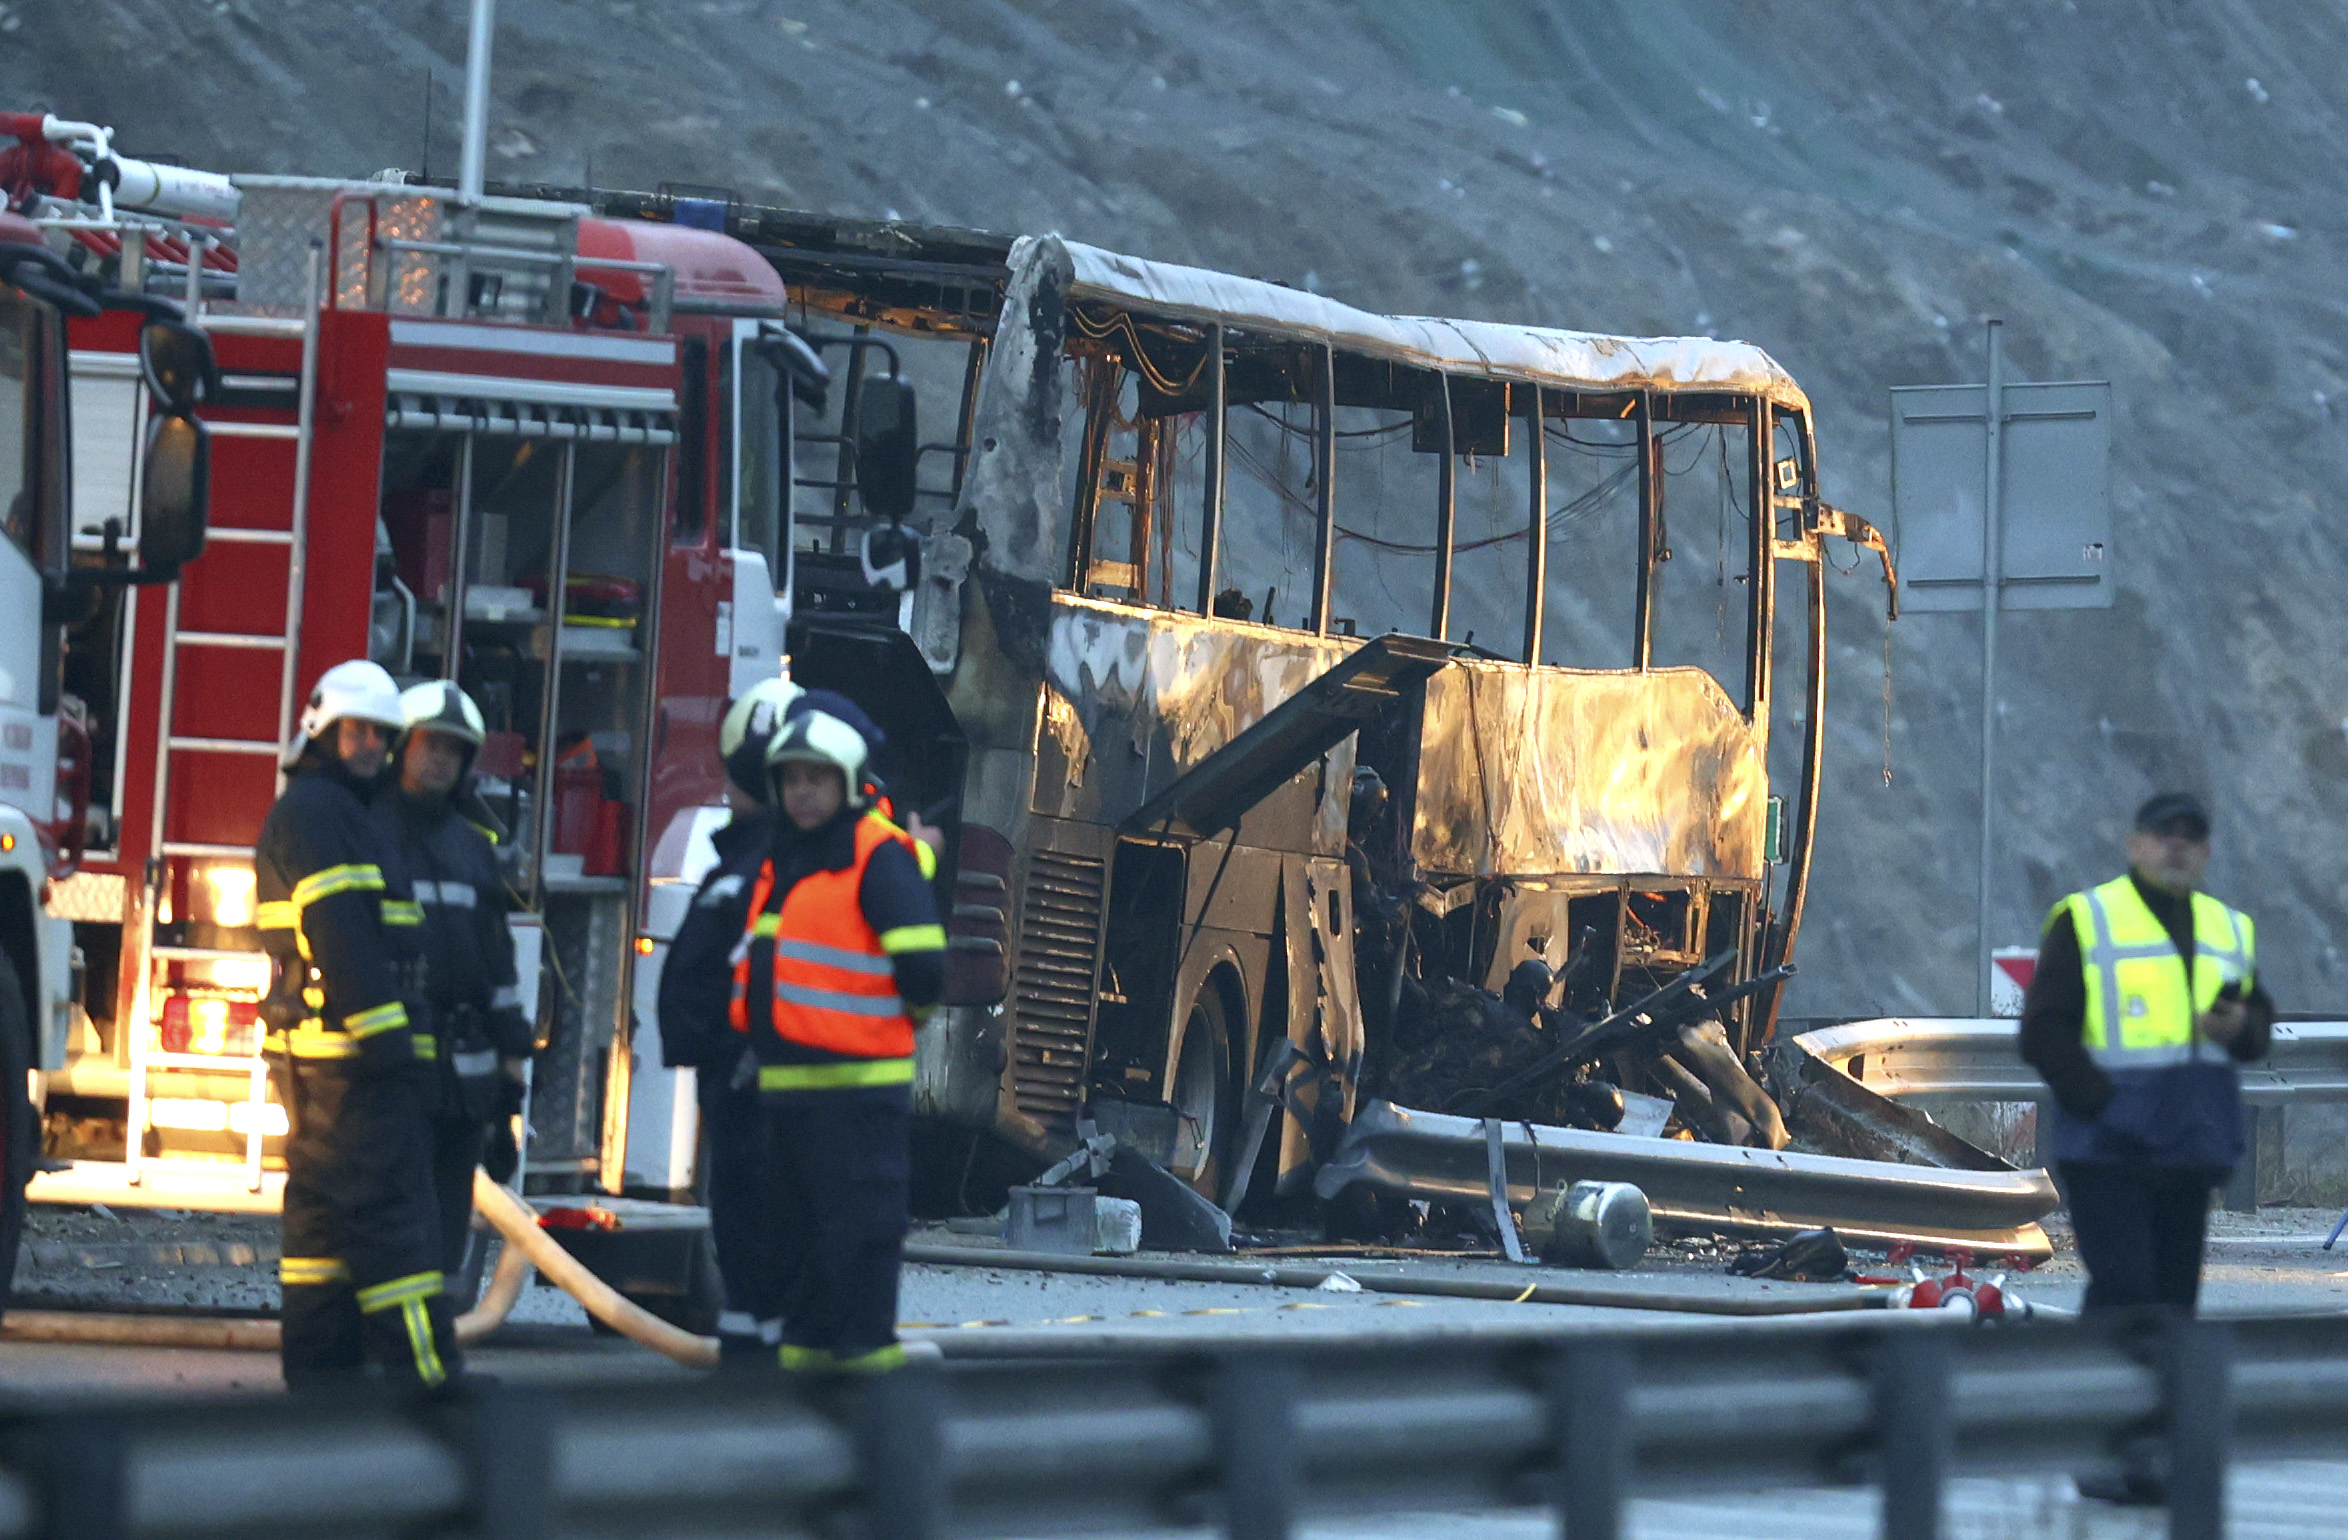 Firefighters and forensic workers inspect the scene of a bus crash which, according to authorities, killed at least 45 people on a highway near the village of Bosnek, western Bulgaria, Tuesday, Nov. 23, 2021. The bus, registered in Northern Macedonia, crashed around 2 a.m. and there were children among the victims, authorities said. (Minko Chernev/BTA Agency Bulgaria via AP)